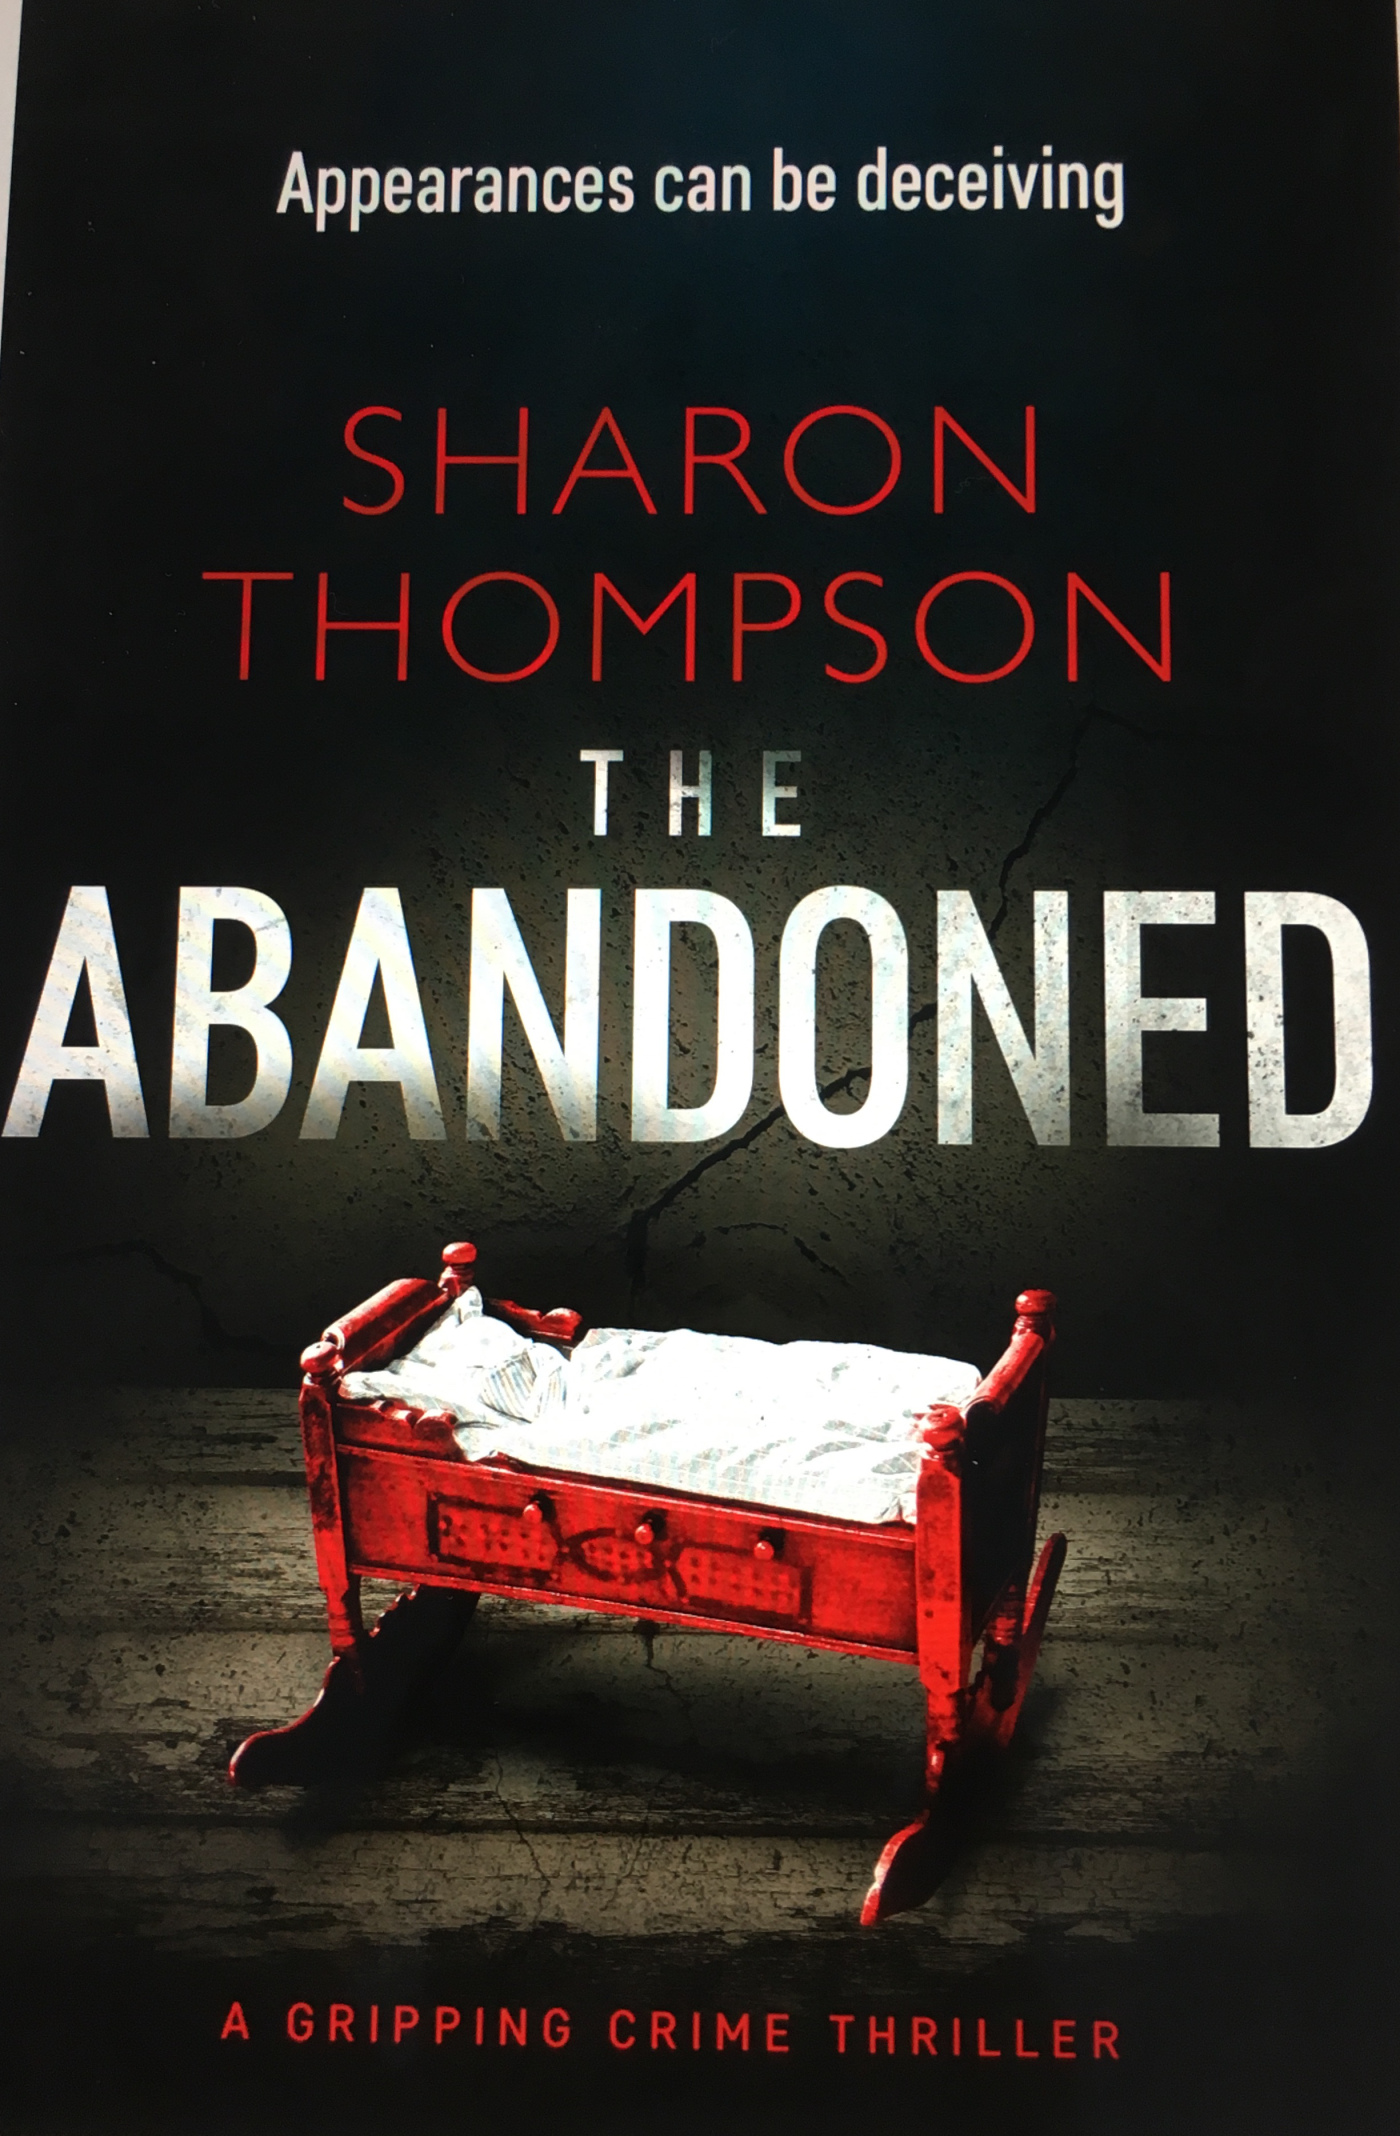 Book Review: The Abandoned by Sharon Thompson